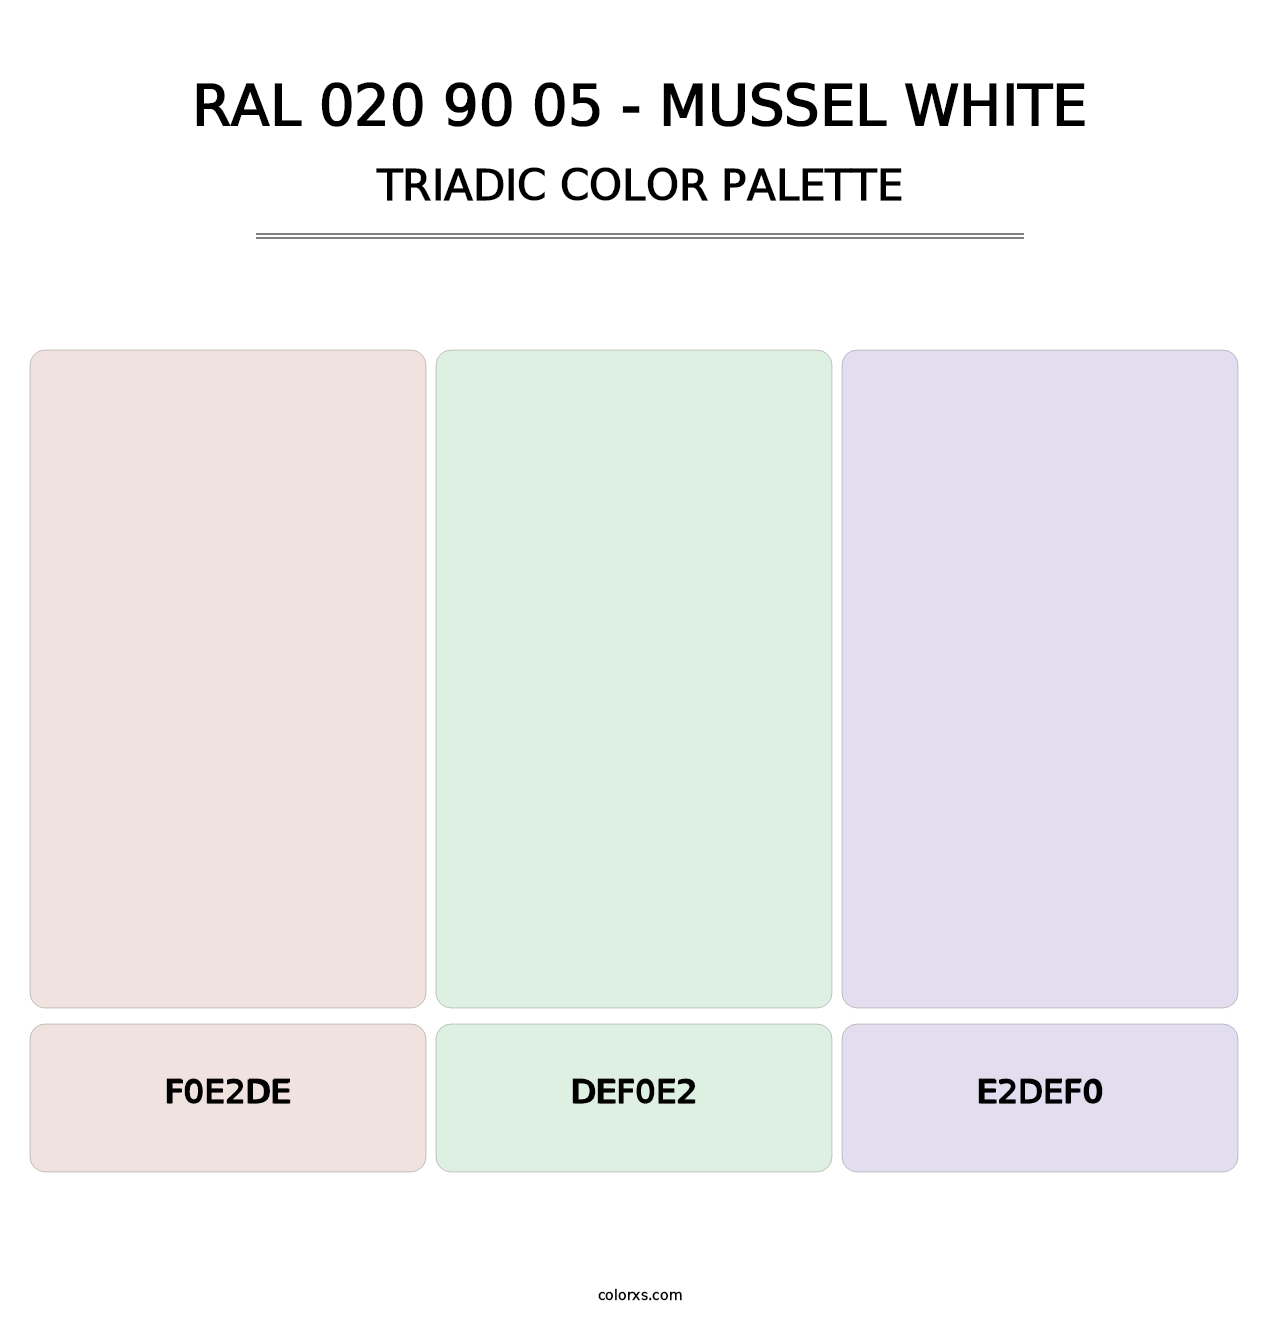 RAL 020 90 05 - Mussel White - Triadic Color Palette